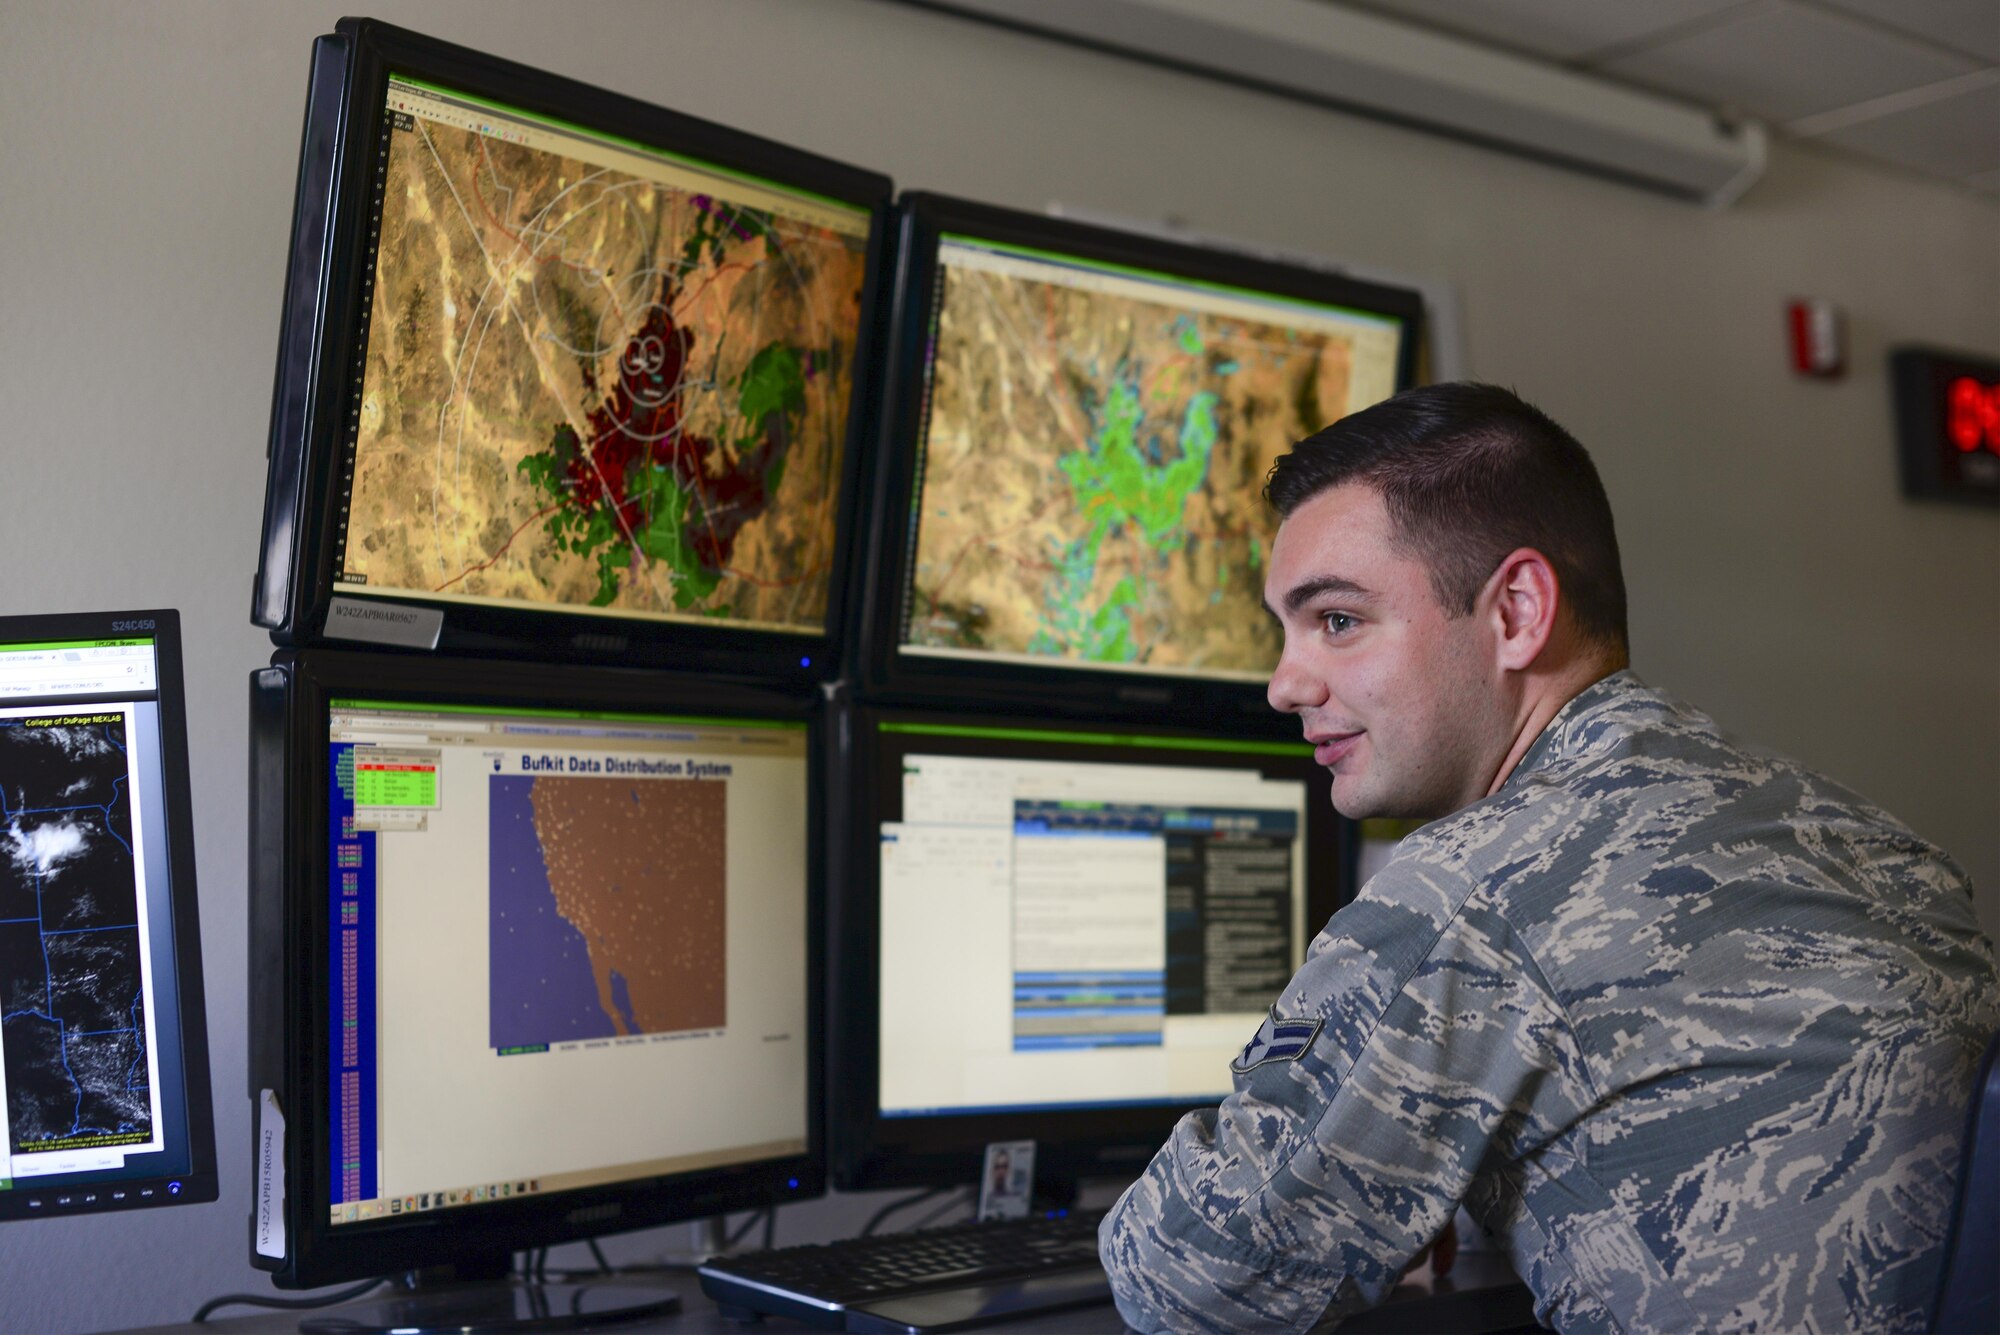 U.S. Air Force Airman 1st Class Cody Leahy, 25th Operational Weather Squadron forecaster, monitors radar at Davis-Monthan Air Force Base, Ariz., July 19, 2017. Leahy was monitoring base wind velocity and weather conditions of Nellis AFB, Nev. (U.S. Air Force photo by Airman 1st Class Michael X. Beyer)